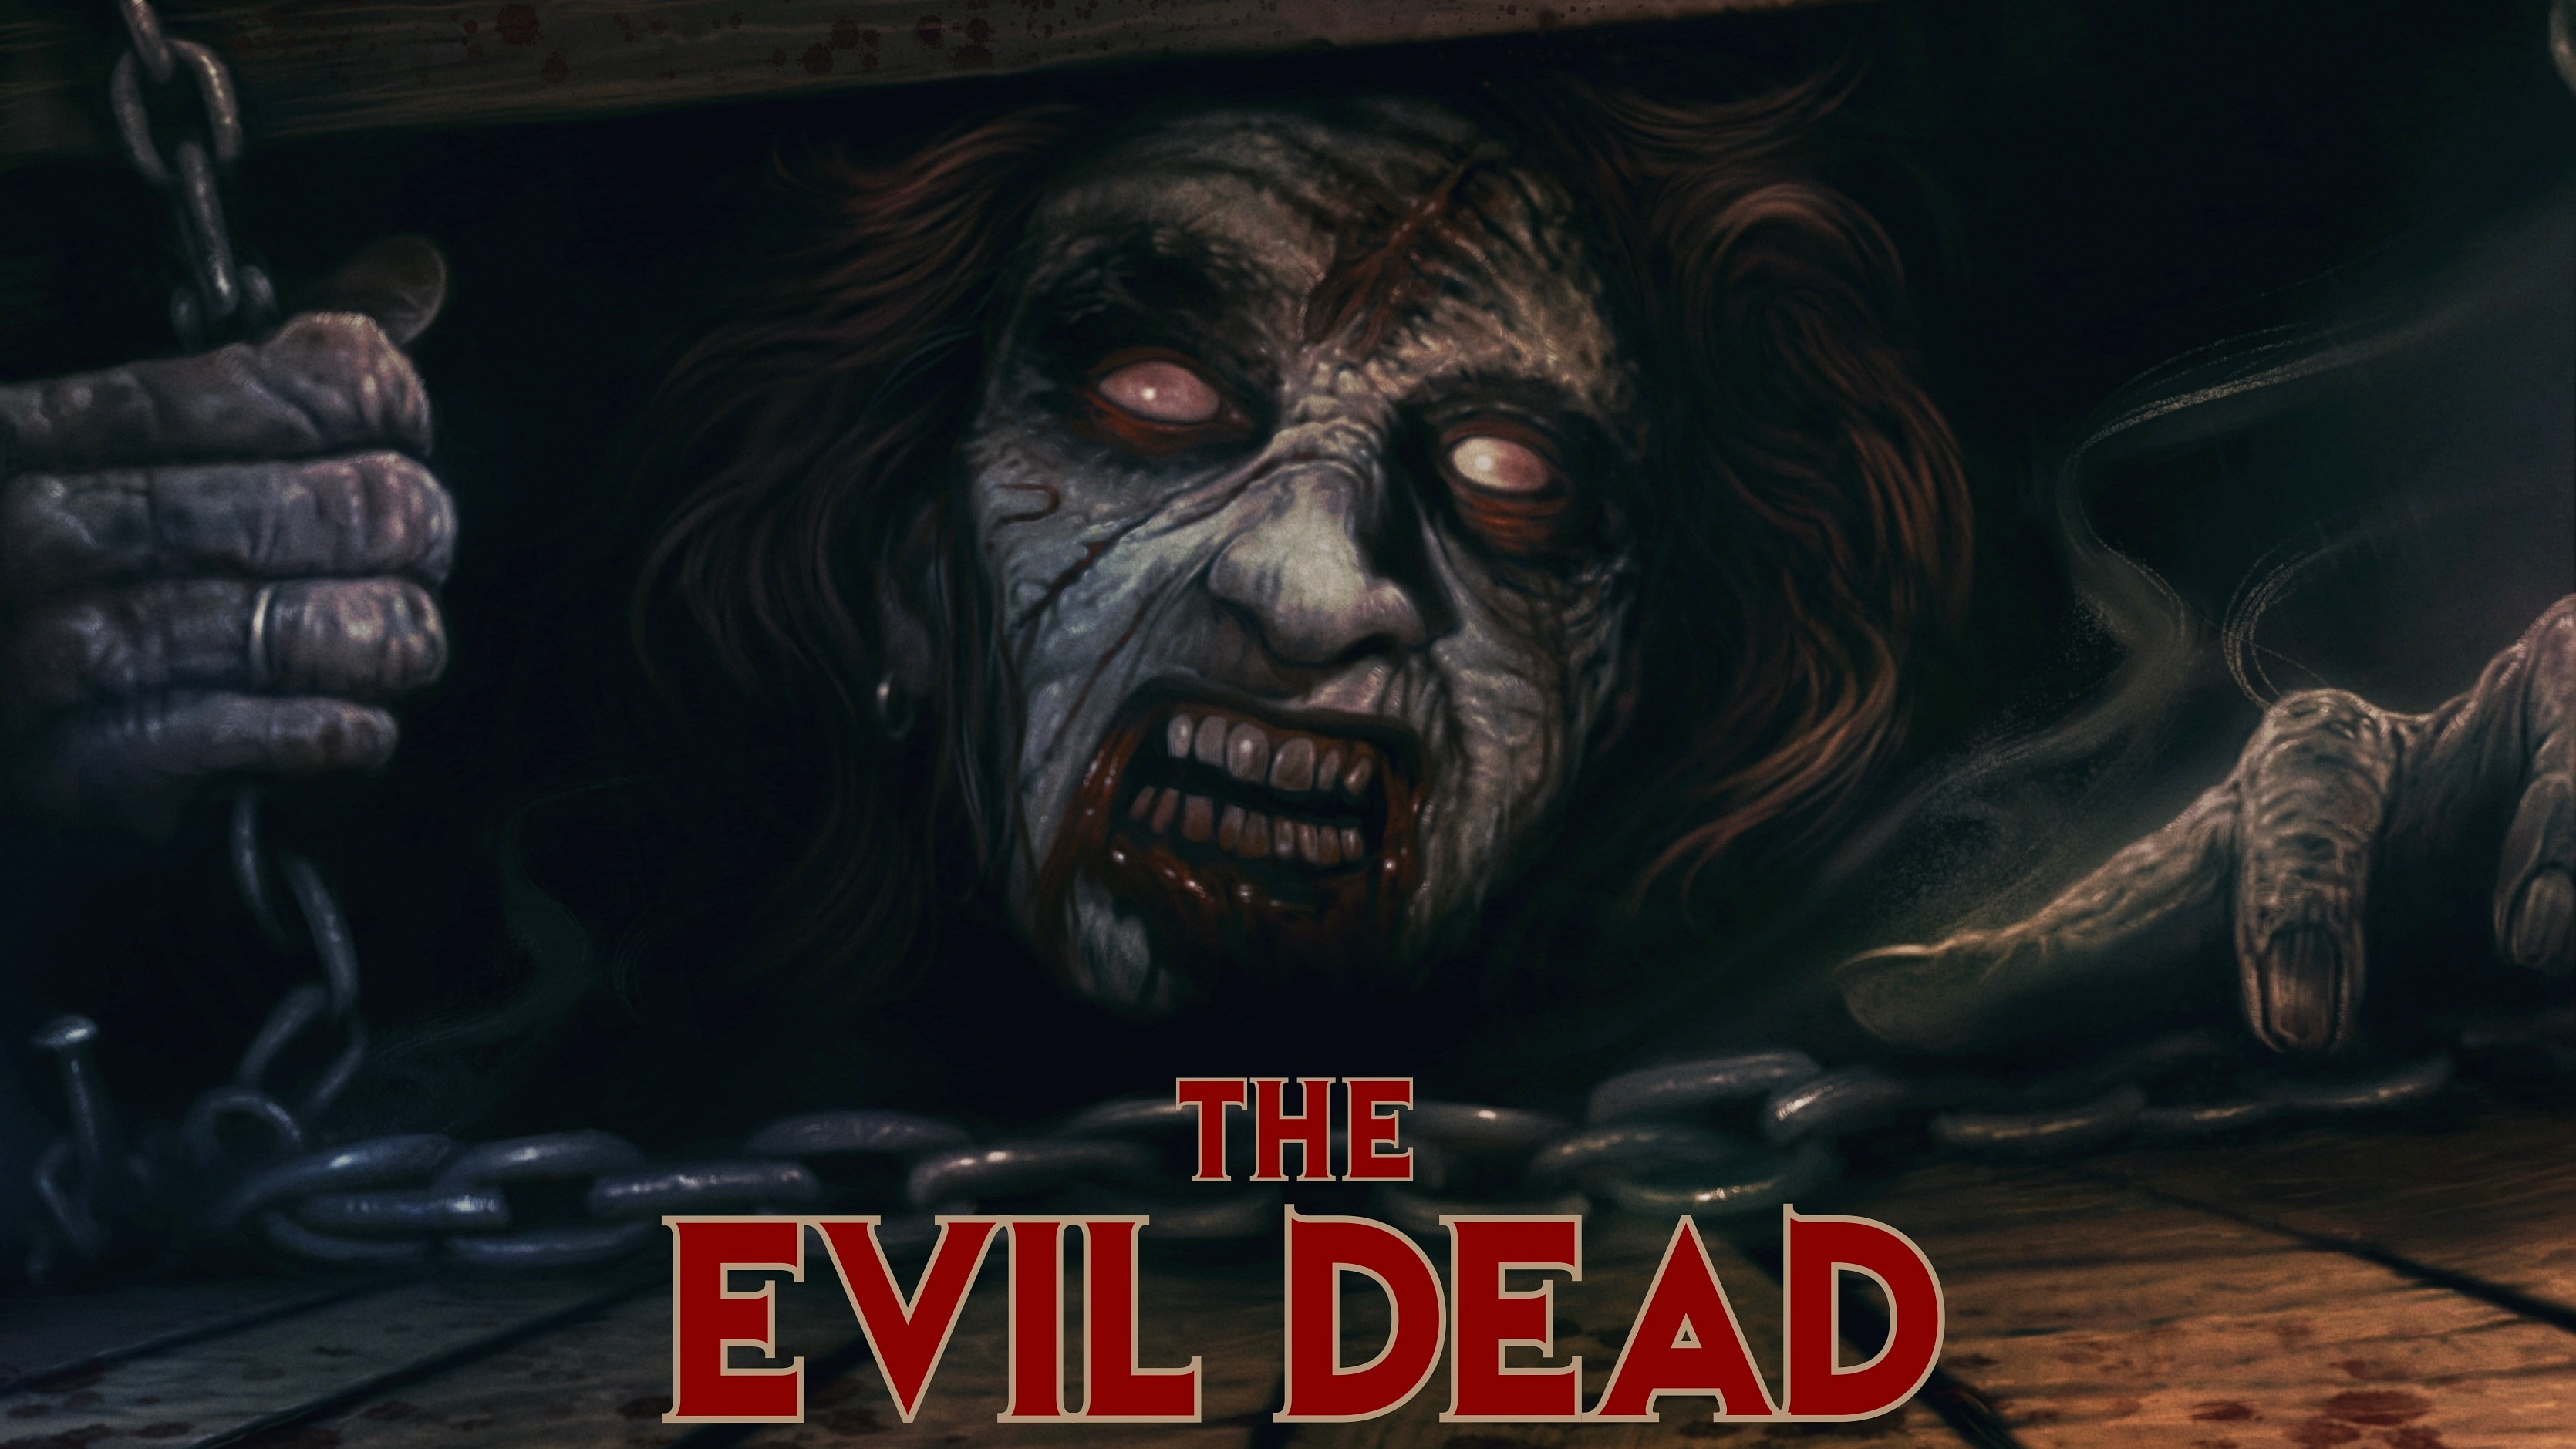 Movie The Evil Dead (1981) HD Wallpaper | Background Image